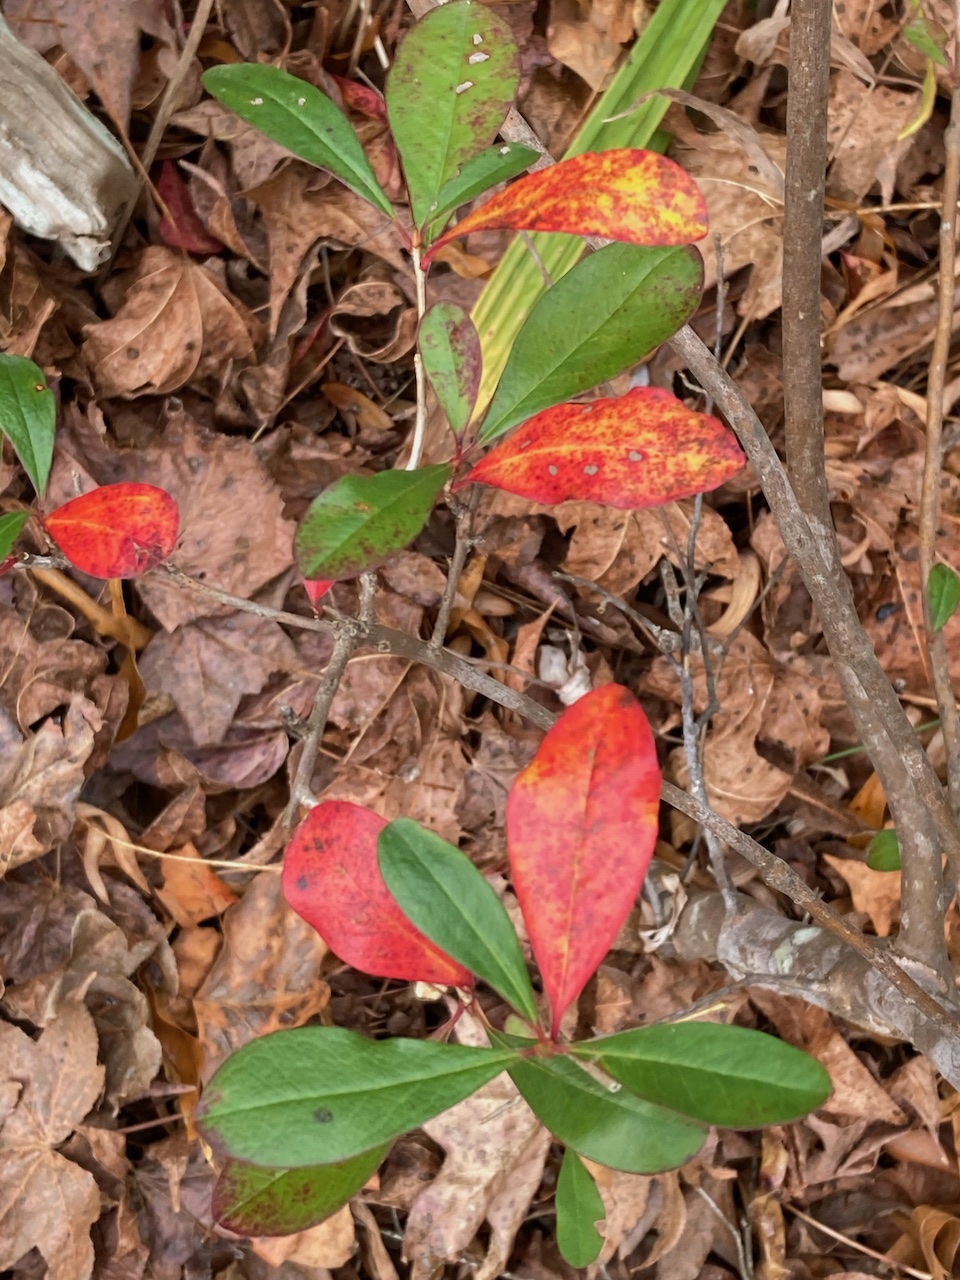 The Scientific Name is Cyrilla racemiflora. You will likely hear them called Swamp Titi, Swamp Cyrilla. This picture shows the Some of the leaves senescing and exhibiting nice Fall color on this semi-evergreen shrub. of Cyrilla racemiflora